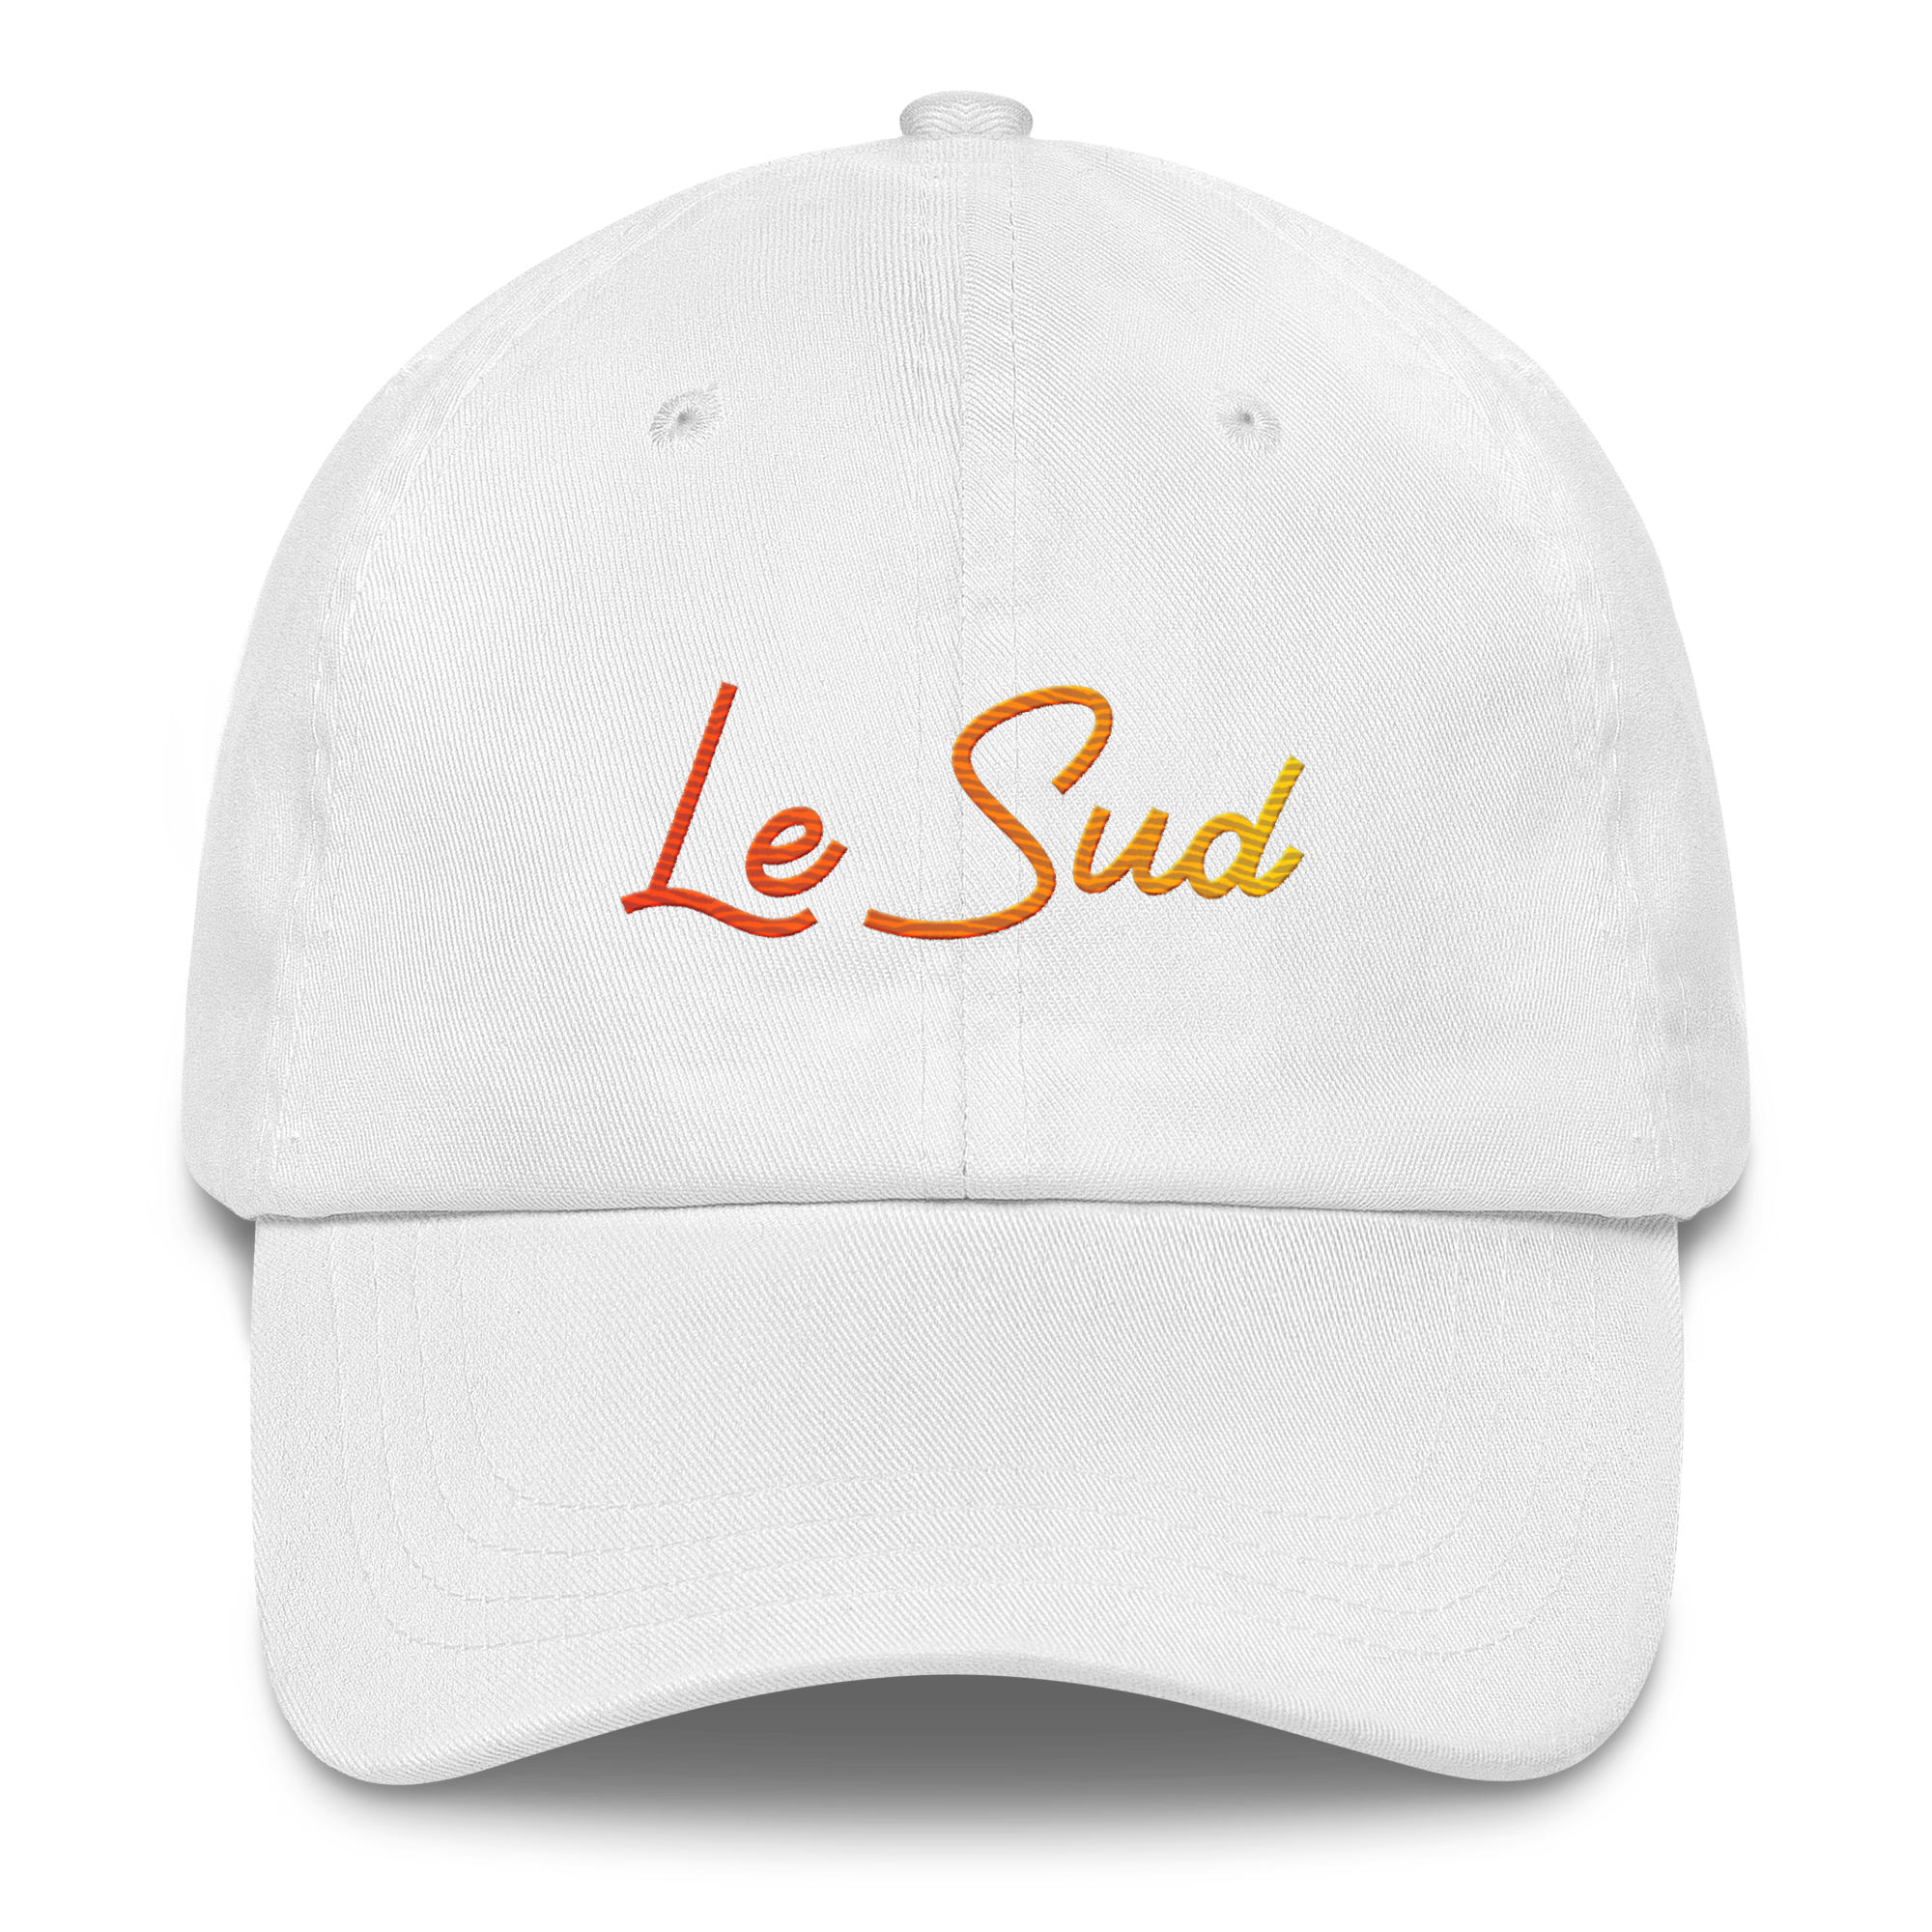 classic-dad-hat-white-front-6697f95645a51.png